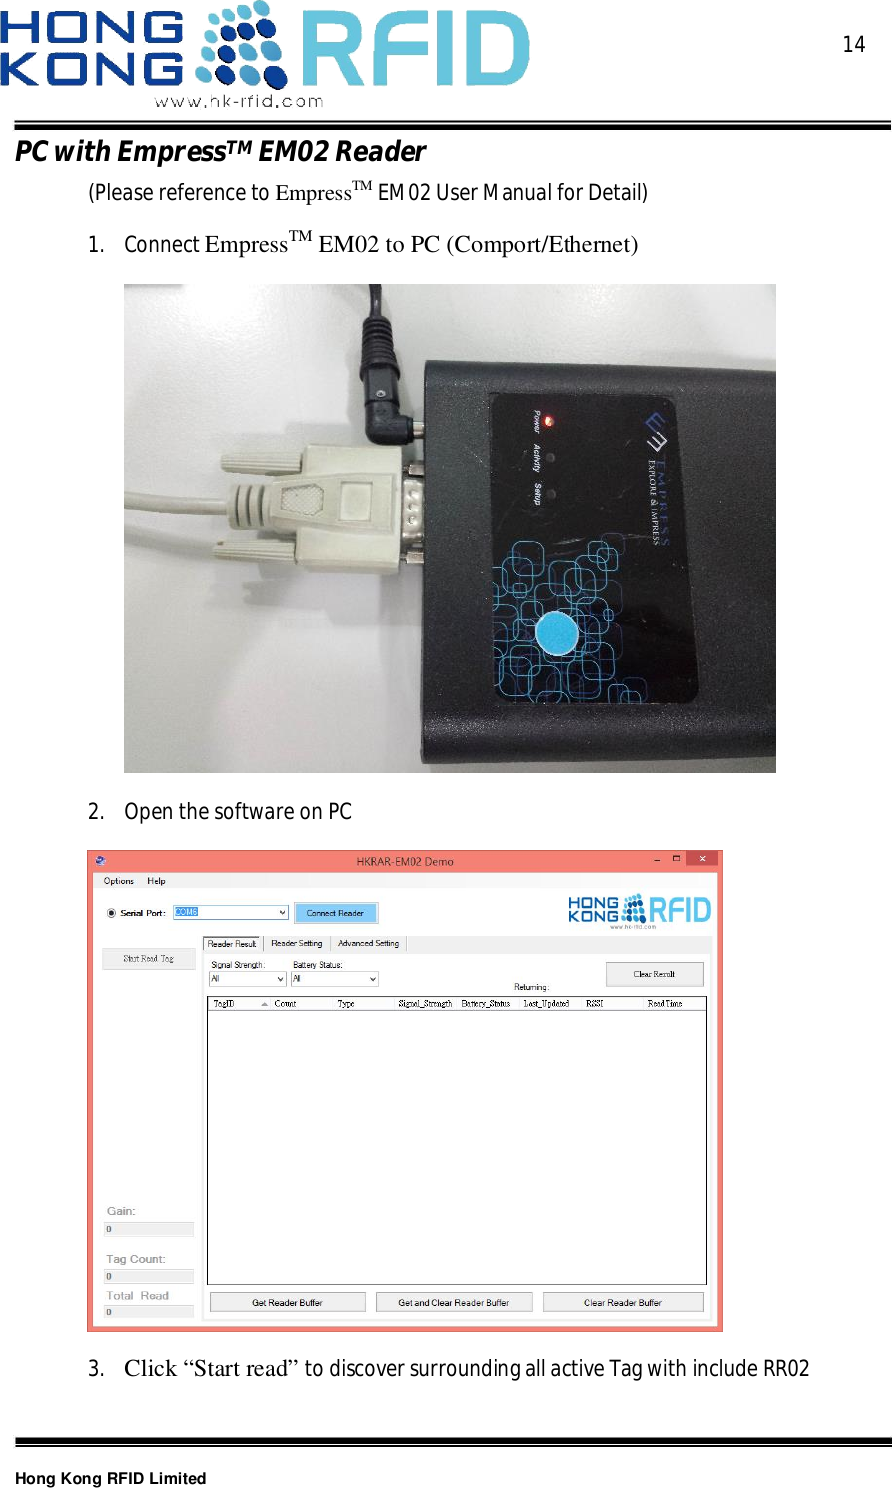  14Hong Kong RFID LimitedPCwithEmpressTMEM02Reader(Please reference to EmpressTM EM02 User Manual for Detail)1. Connect EmpressTM EM02 to PC (Comport/Ethernet)2. Open the software on PC3. Click “Start read” to discover surrounding all active Tag with include RR02